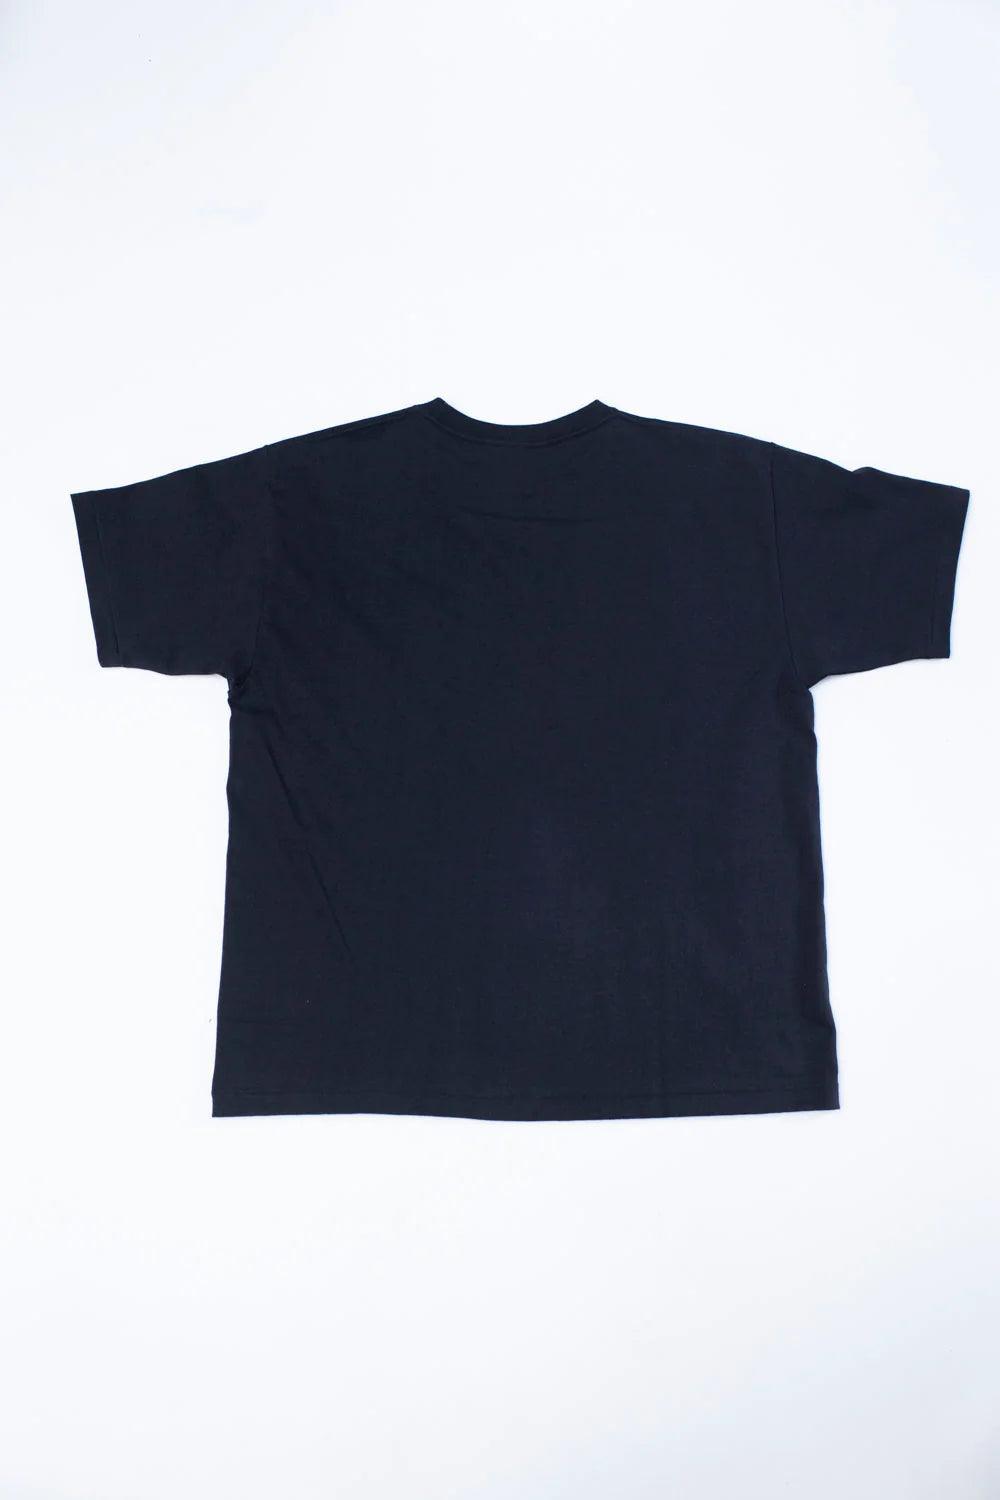 Lot 263 - Pocket Tee - Black - Guilty Party